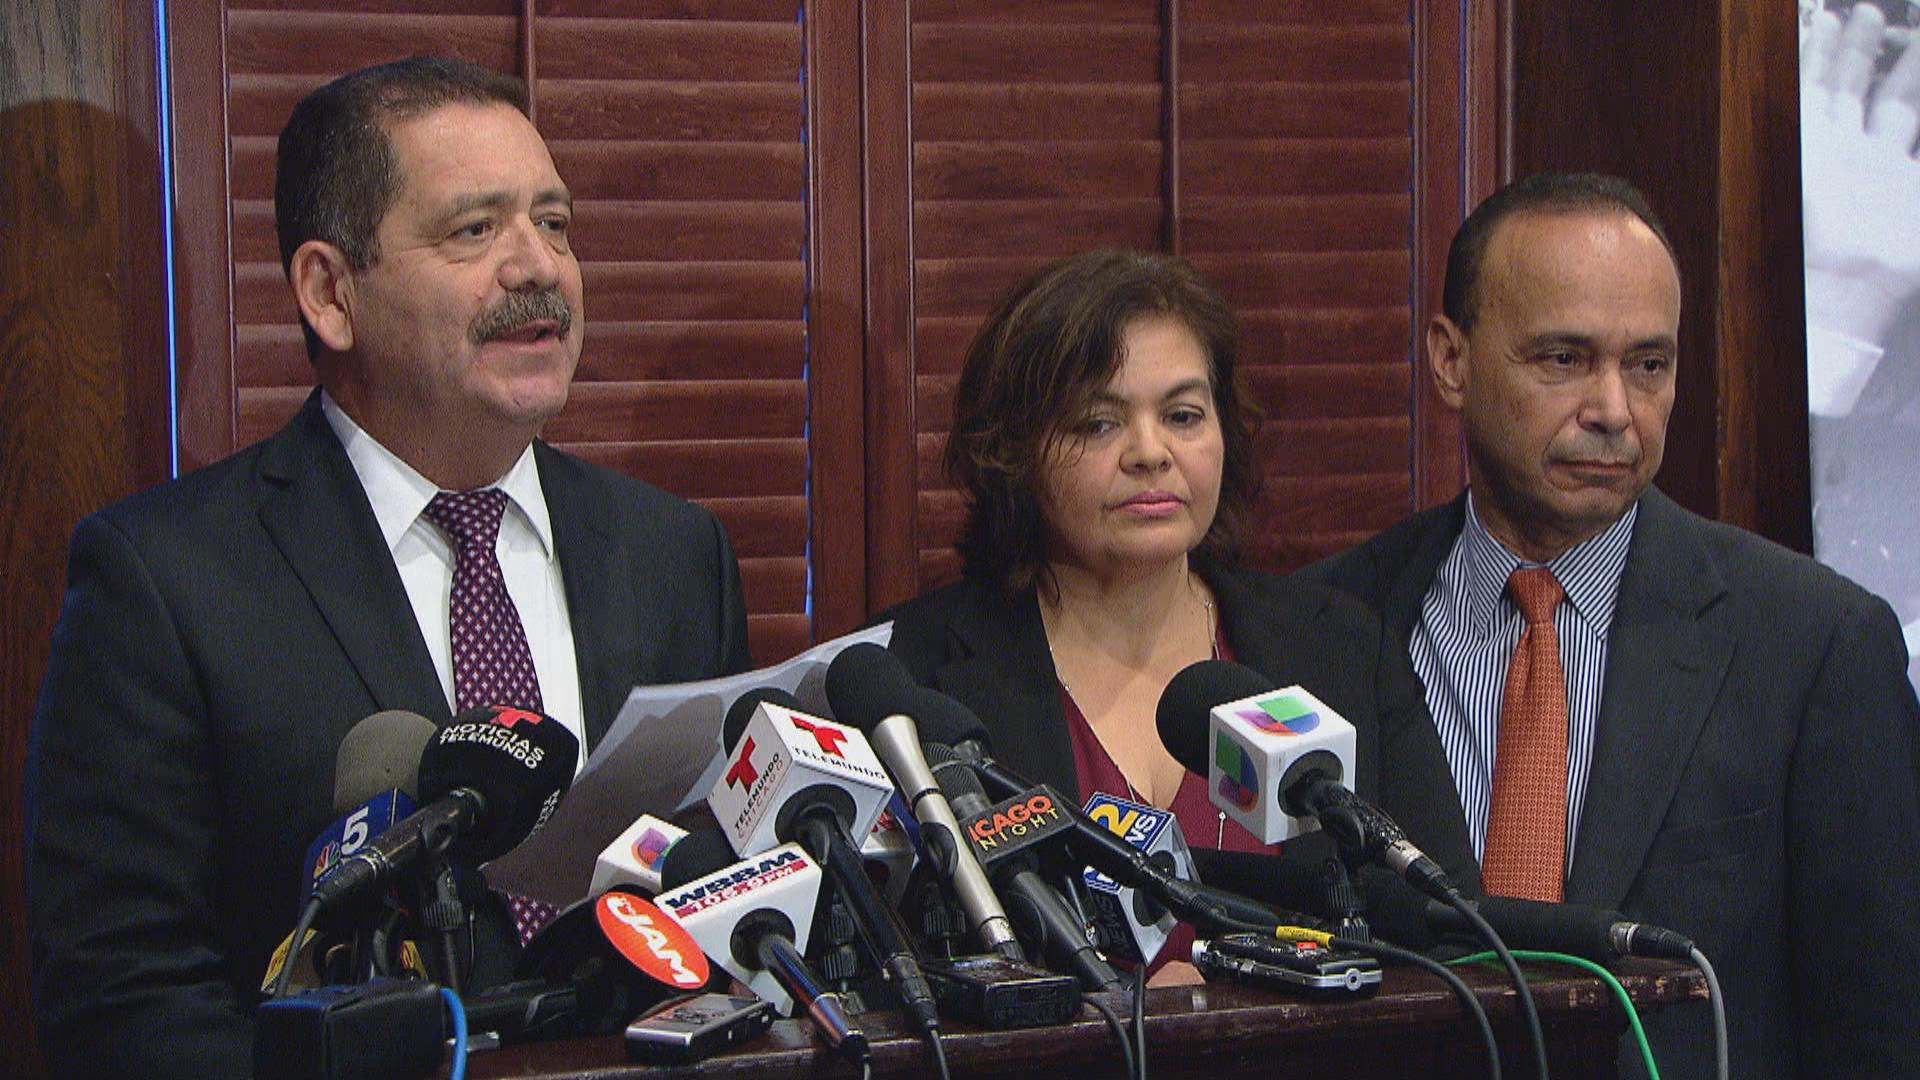 Cook County Commissioner Jesus “Chuy” Garcia speaks on Tuesday, Nov. 28.